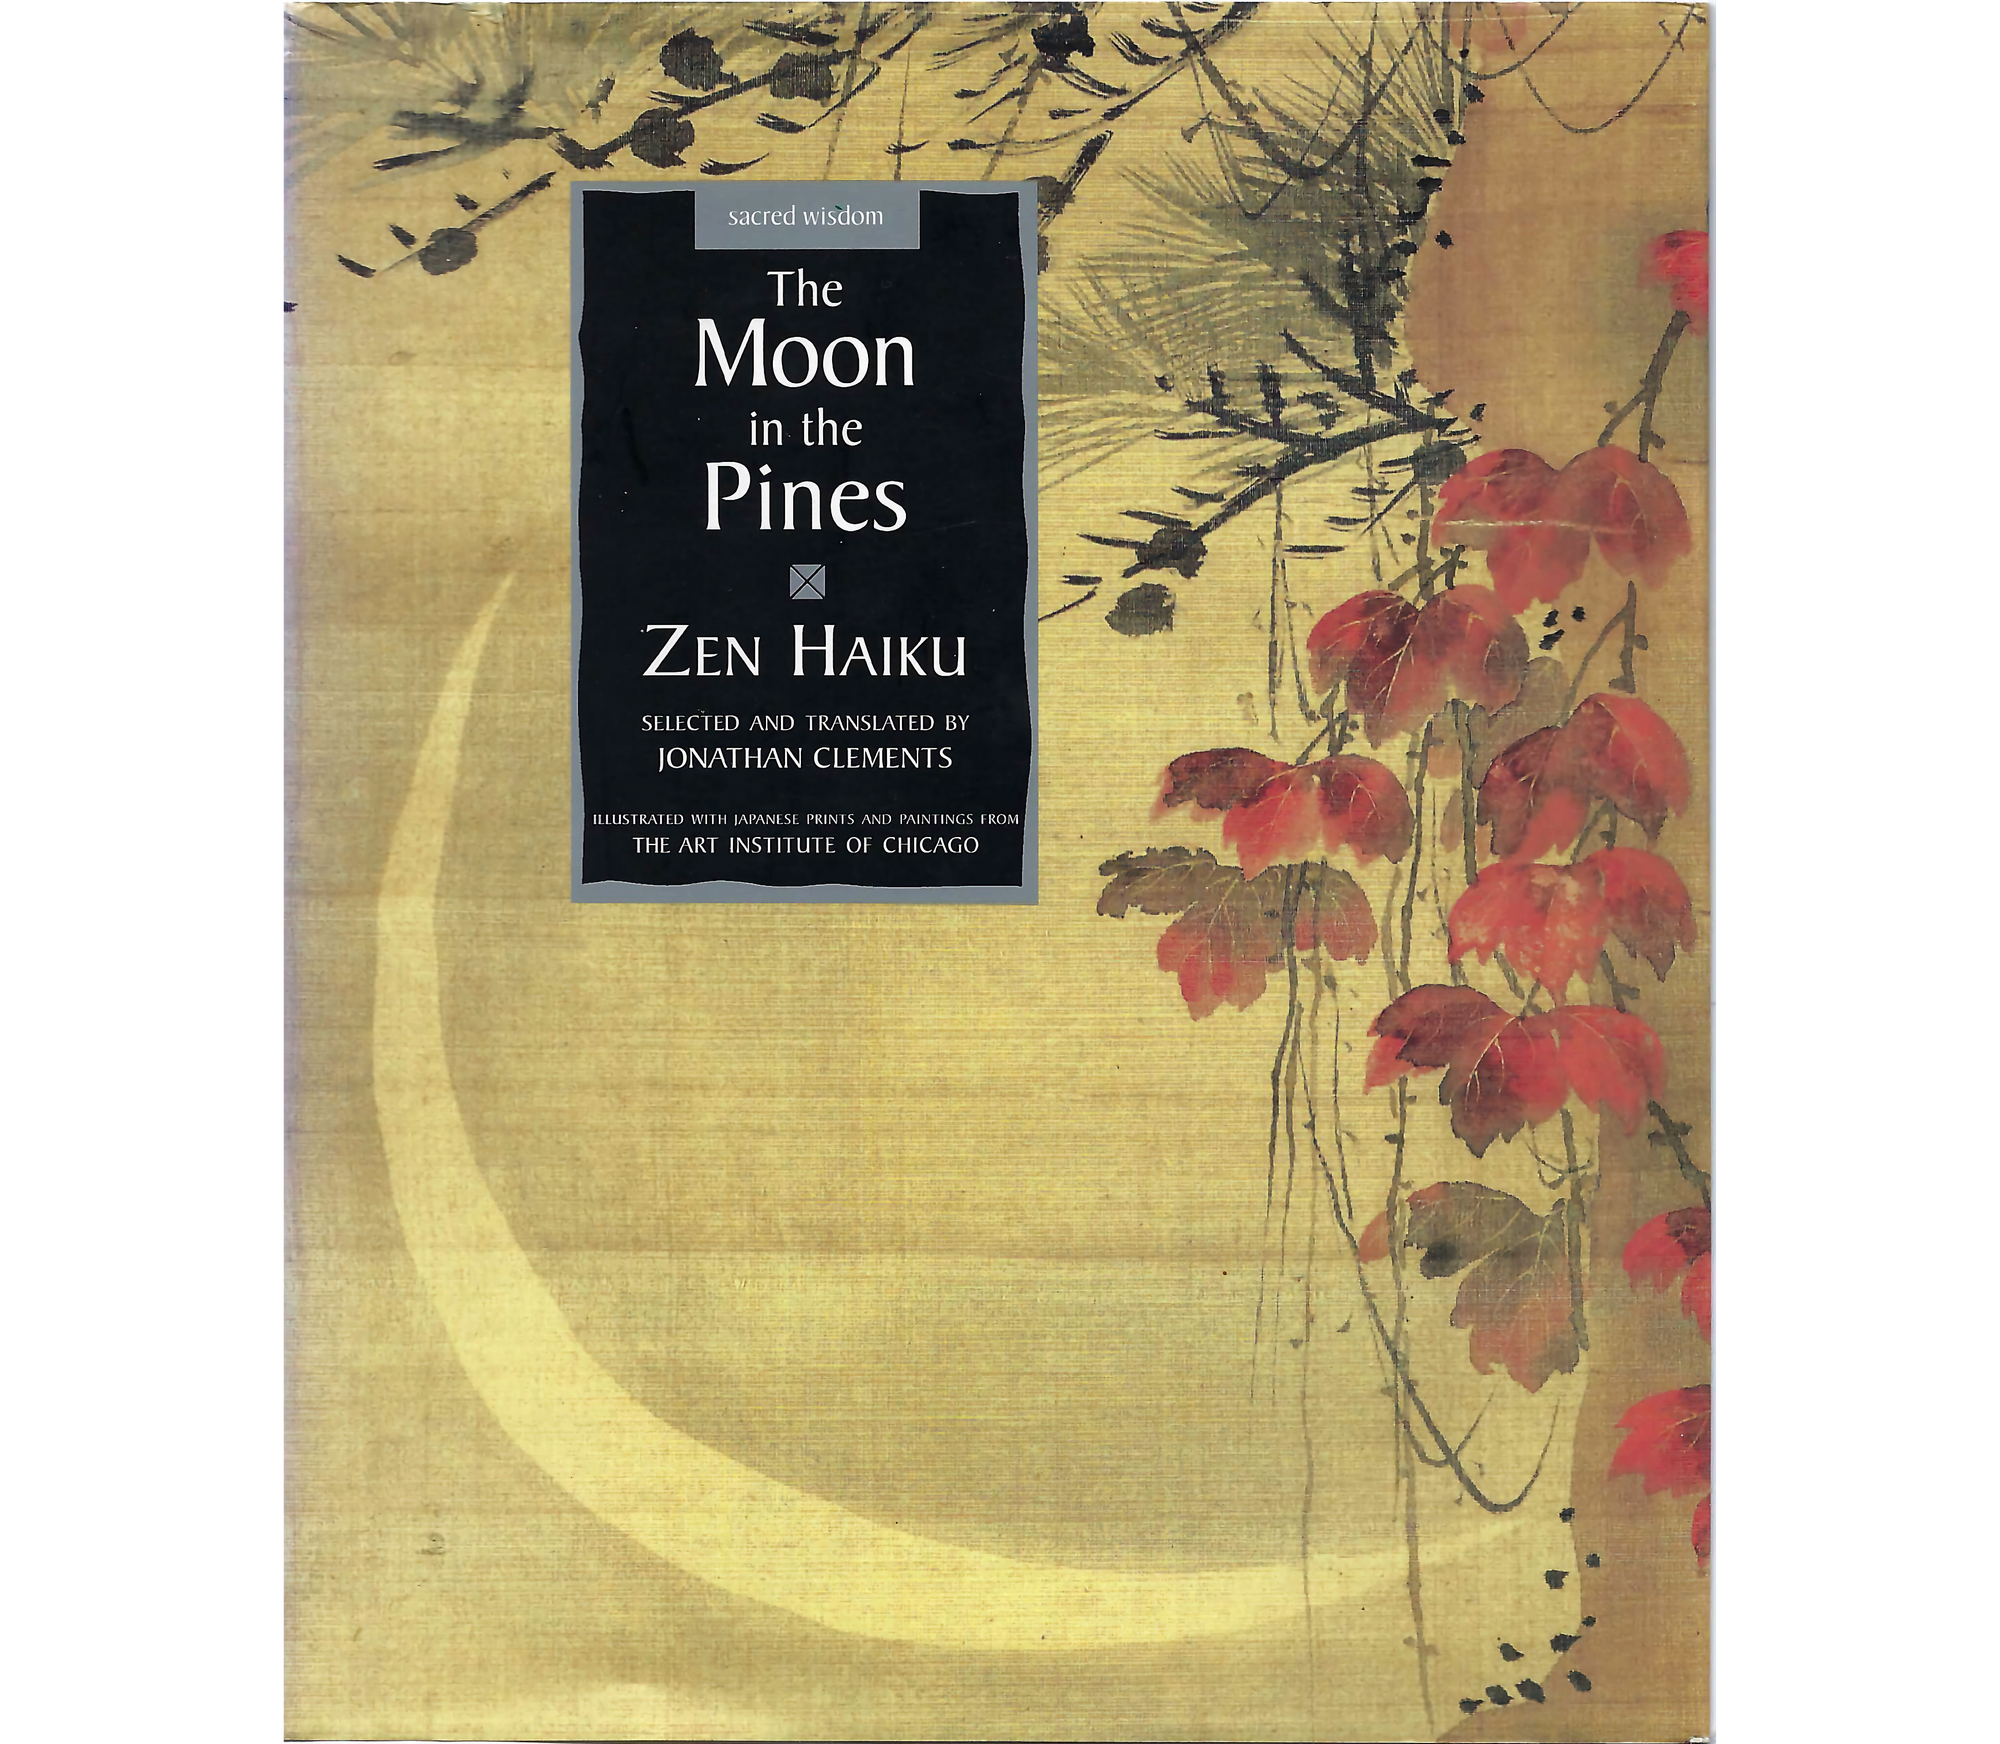 Image of cover of "The Moon in the Pines,' showing crescent moon behind pine needles and red leaves